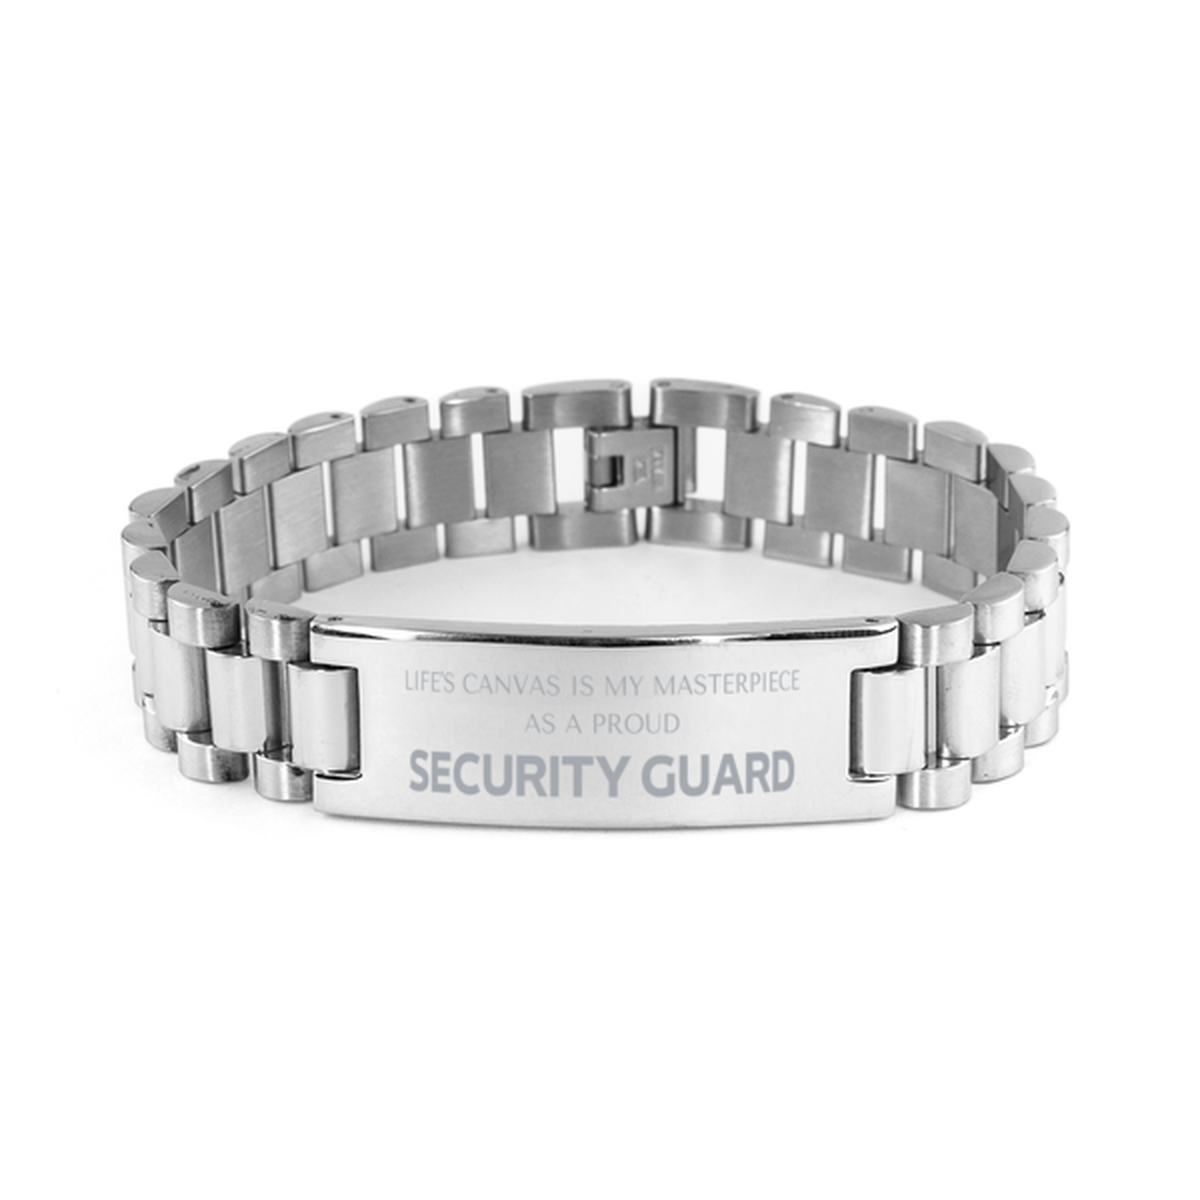 Proud Security Guard Gifts, Life's canvas is my masterpiece, Epic Birthday Christmas Unique Ladder Stainless Steel Bracelet For Security Guard, Coworkers, Men, Women, Friends